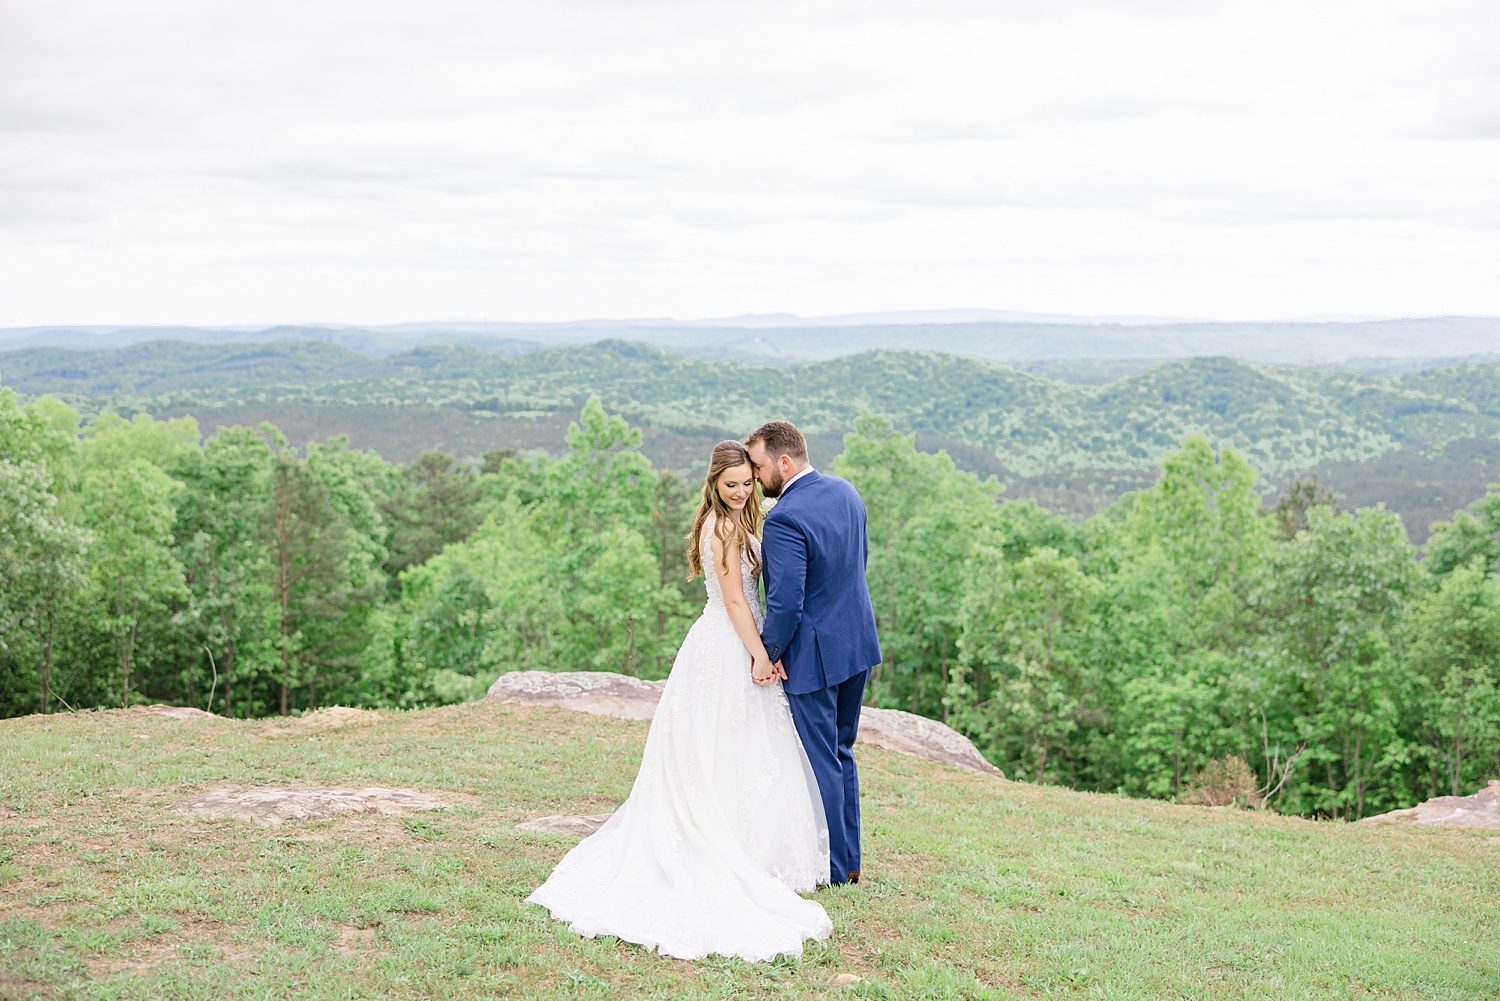 wedding portraits with beautiful natural backdrop of rolling hills and valleys at Weddings at Cabin Bluff